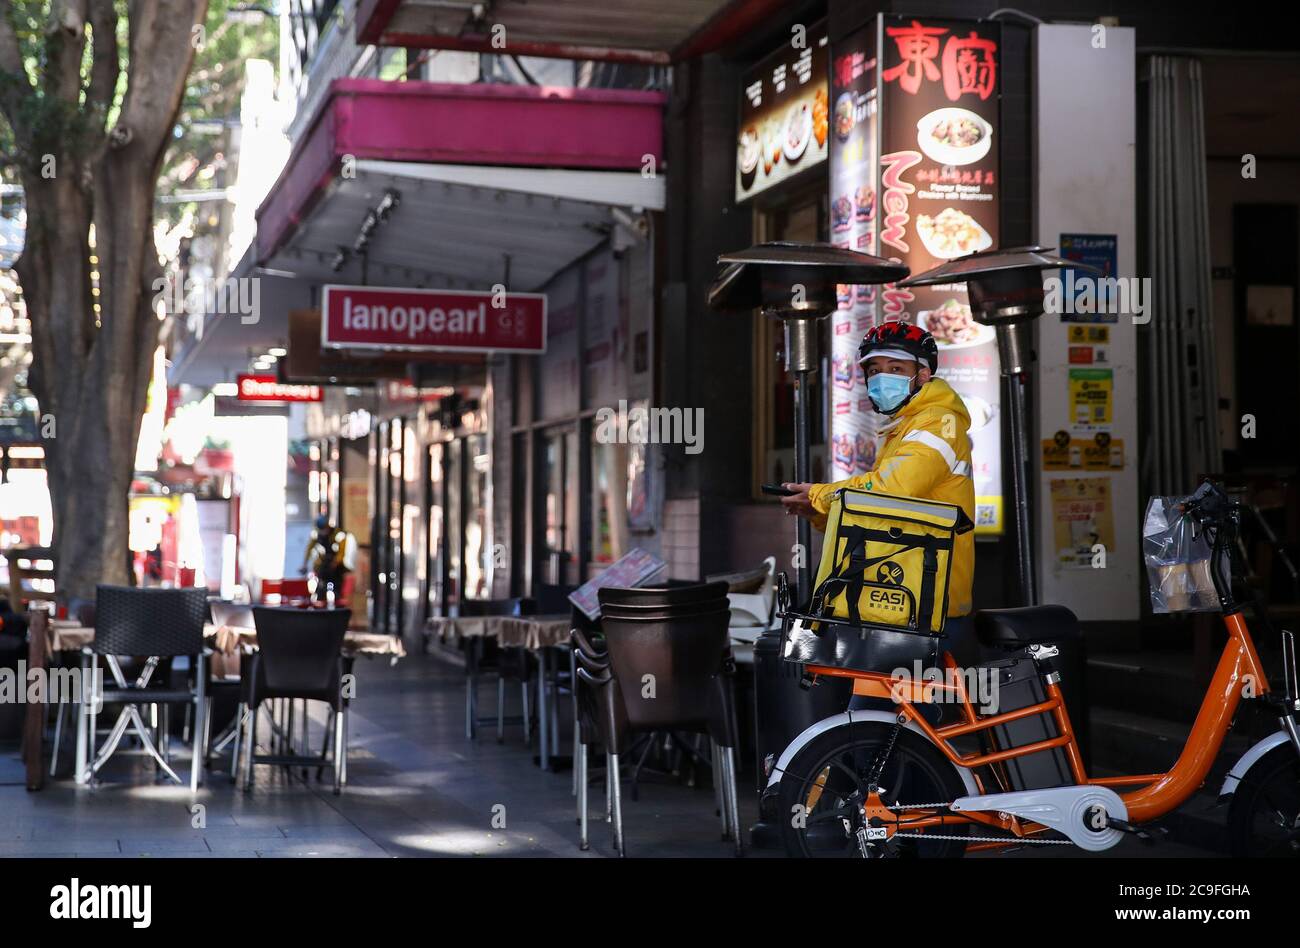 Sydney, Australia. 29th July, 2020. A delivery man waits outside a restaurant in Chinatown of Sydney, Australia, on July 29, 2020. Now, with record COVID-19 cases in the city of Melbourne and Sydney being potentially on the brink of a second wave, restaurants and bars are preparing to be hit with a return to lockdown as they struggle to survive. TO GO WITH 'Feature: Sydney's iconic Chinatown eateries adapt to life under COVID-19' Credit: Bai Xuefei/Xinhua/Alamy Live News Stock Photo